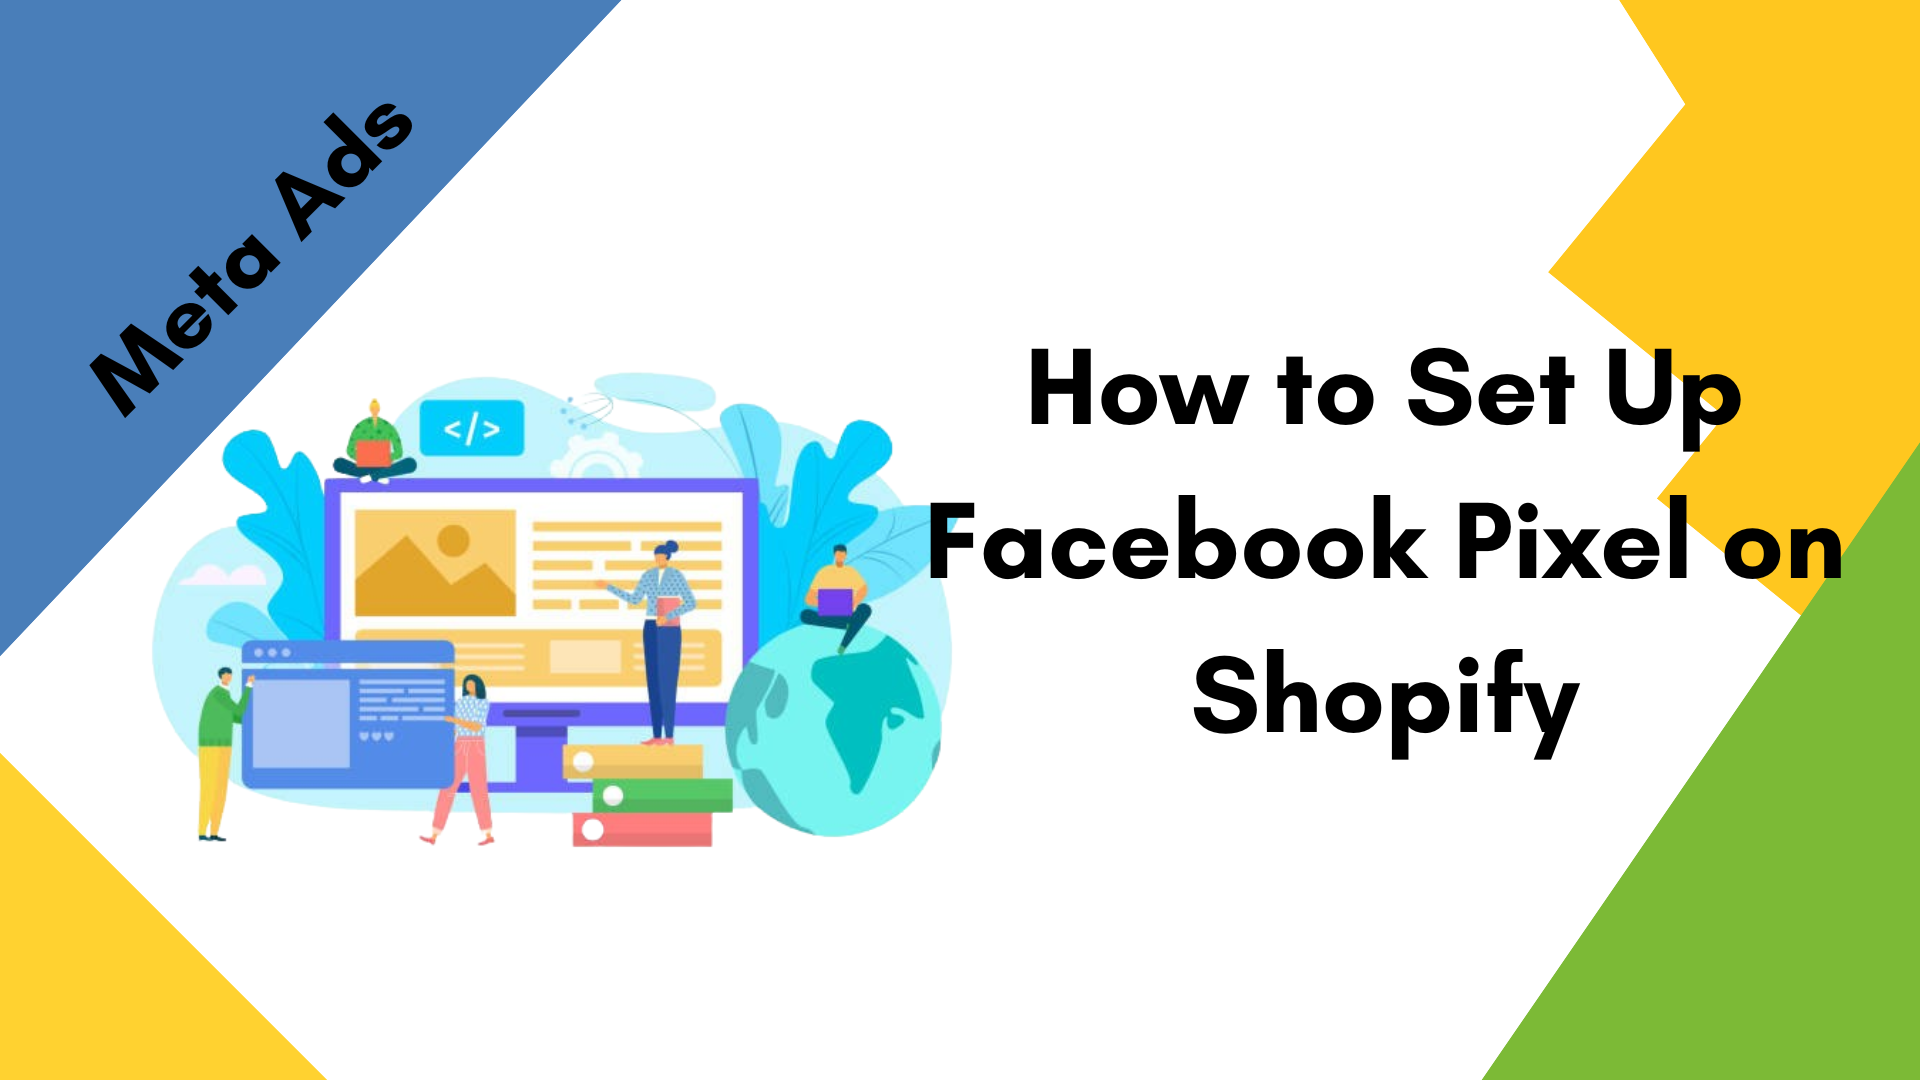 How to Set Up Facebook Pixel on Shopify